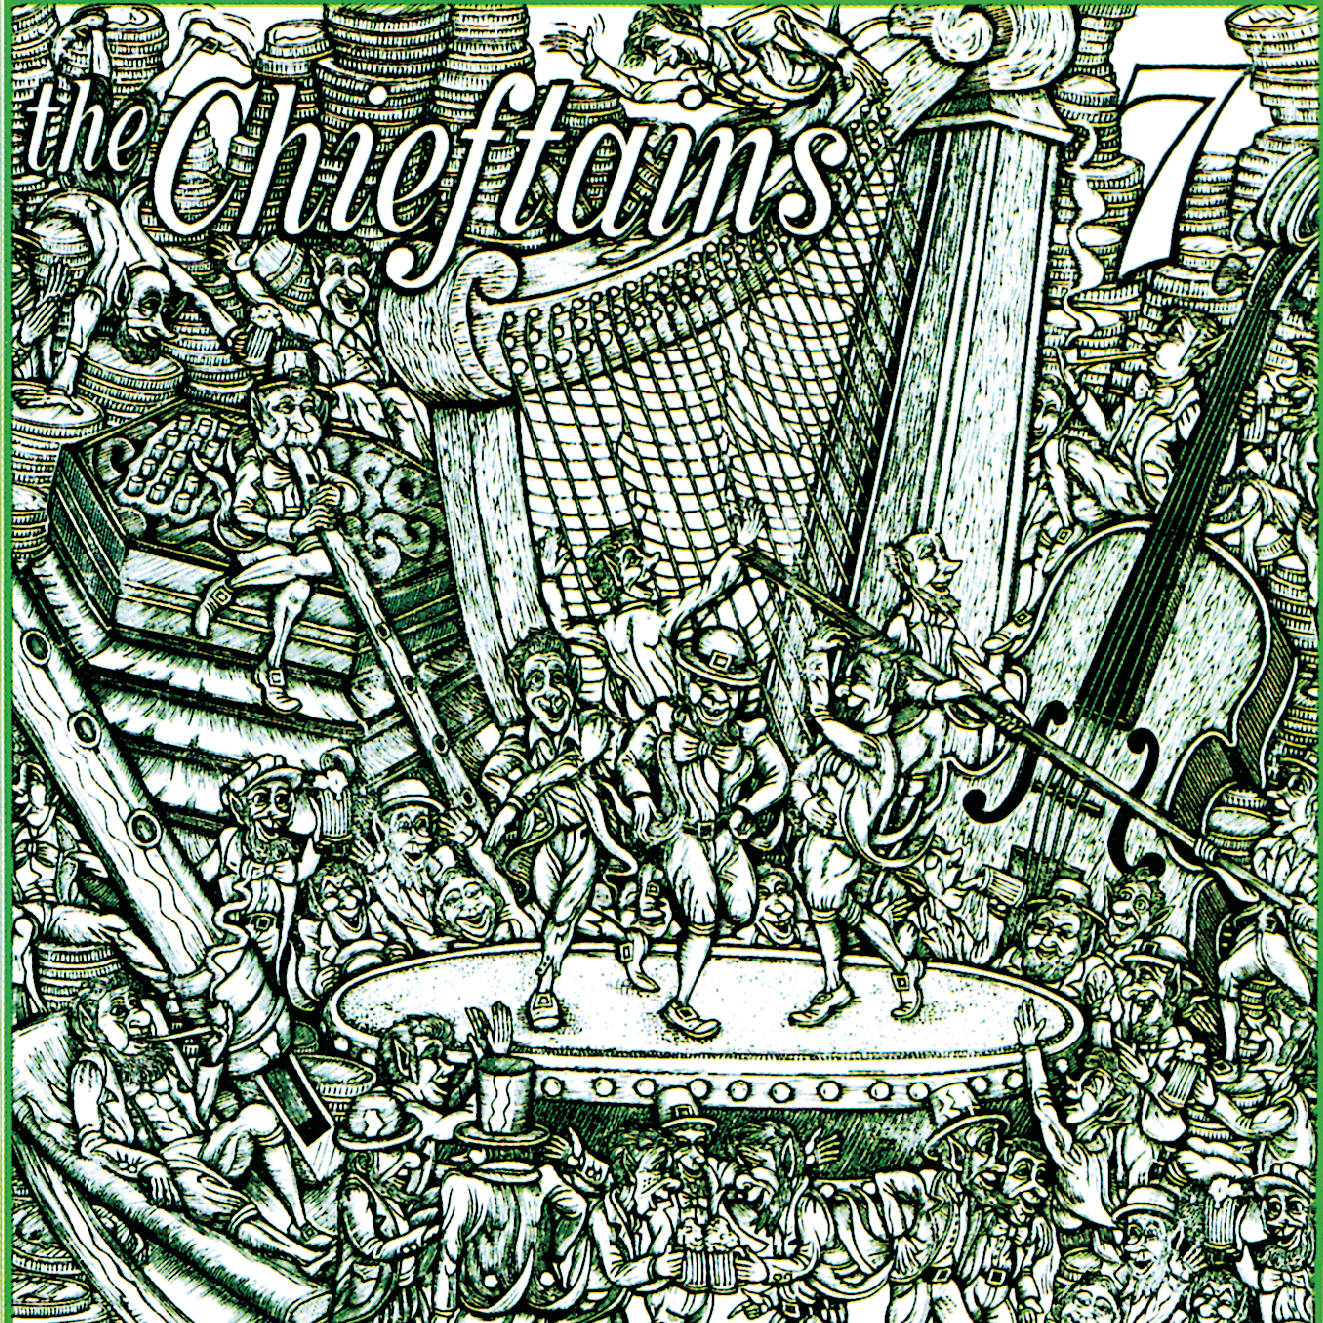 The Best Of The Chieftains